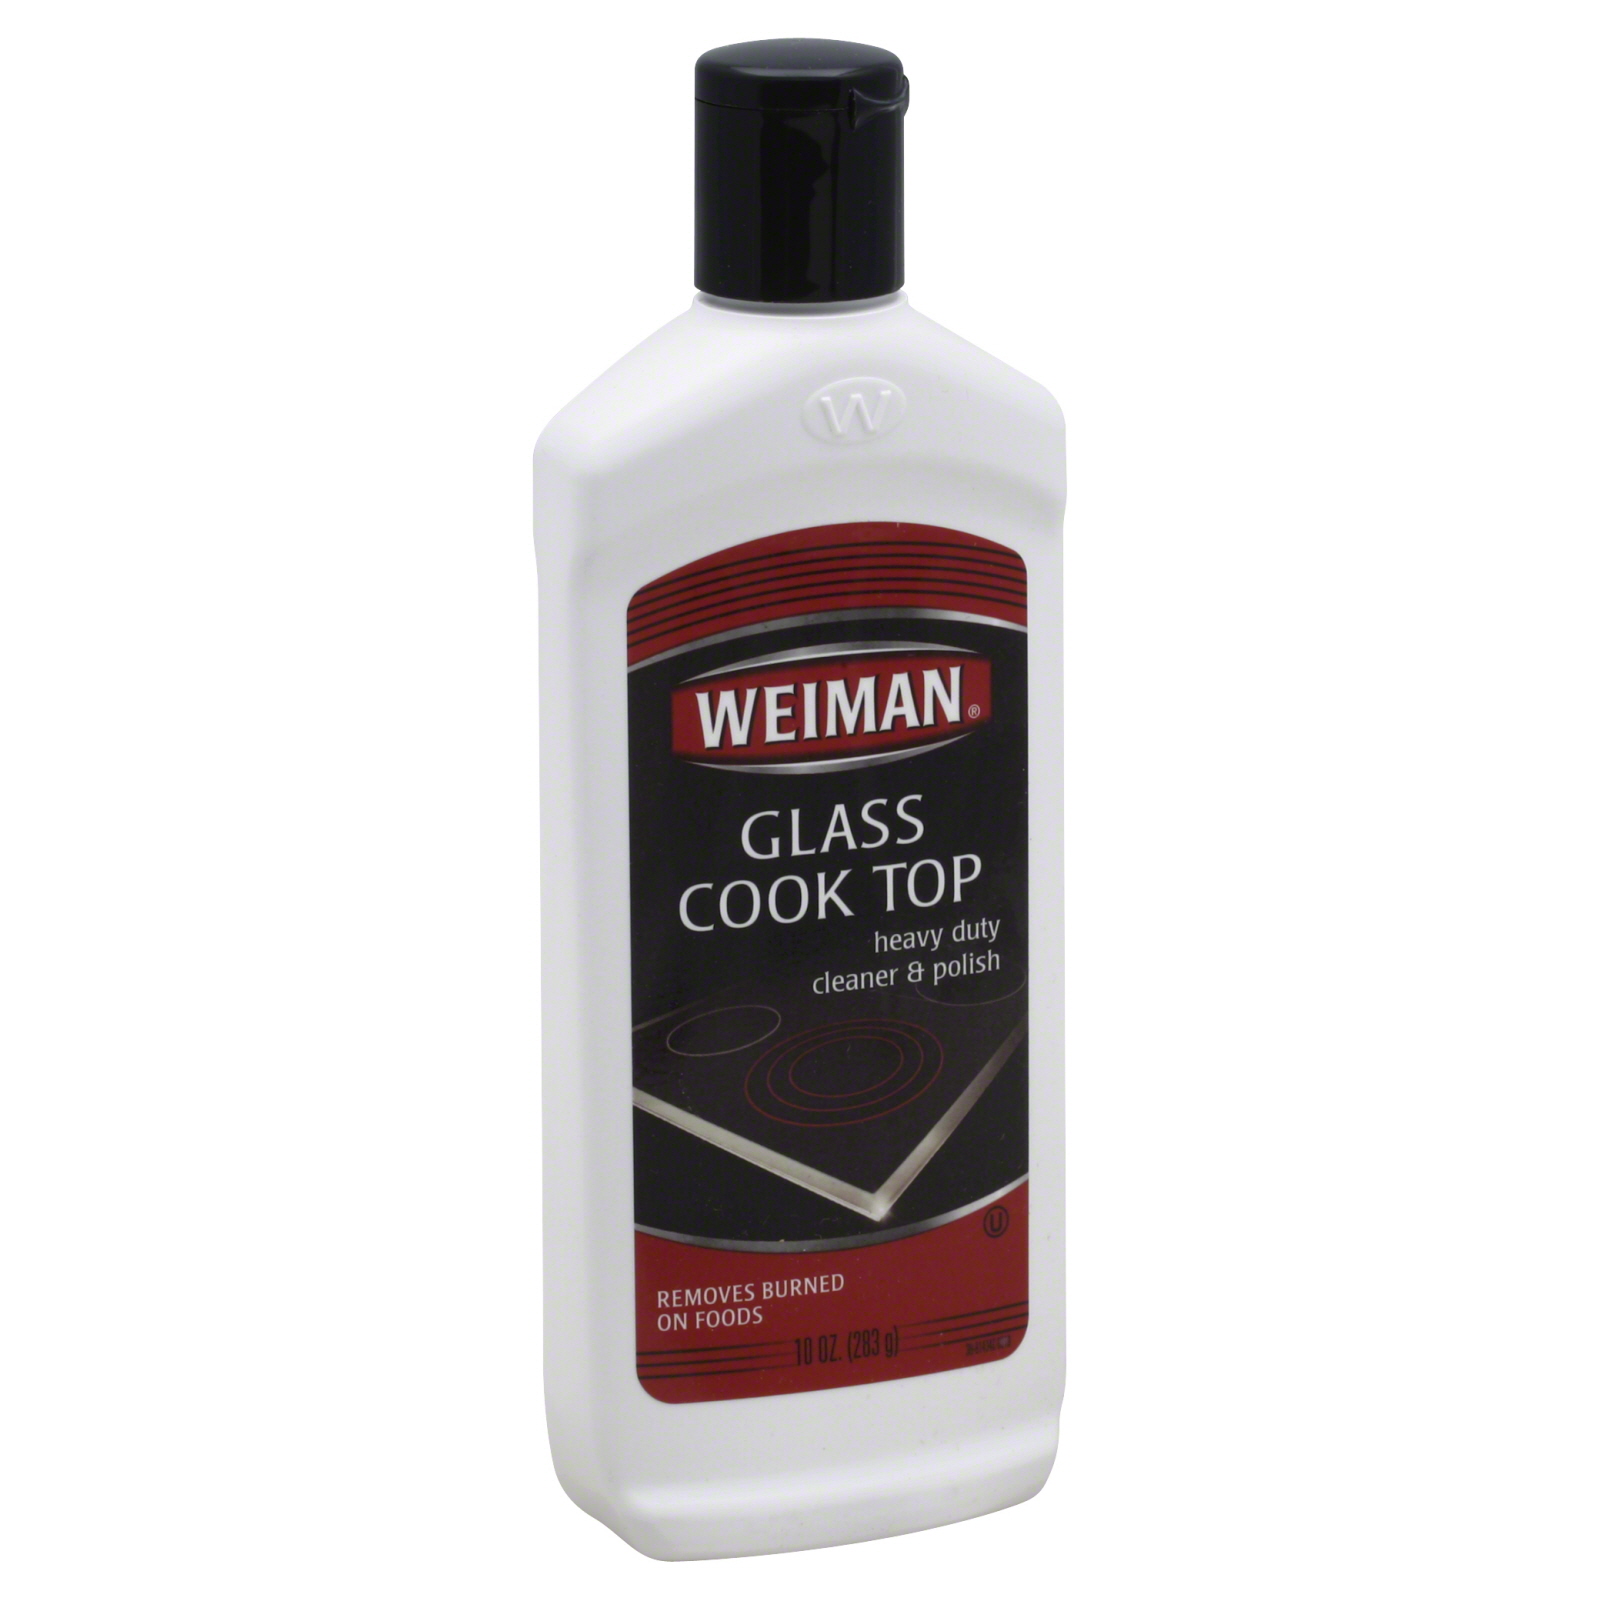 Weiman Heavy Duty Glass Cook Top Cleaner and Polish, 10 oz.